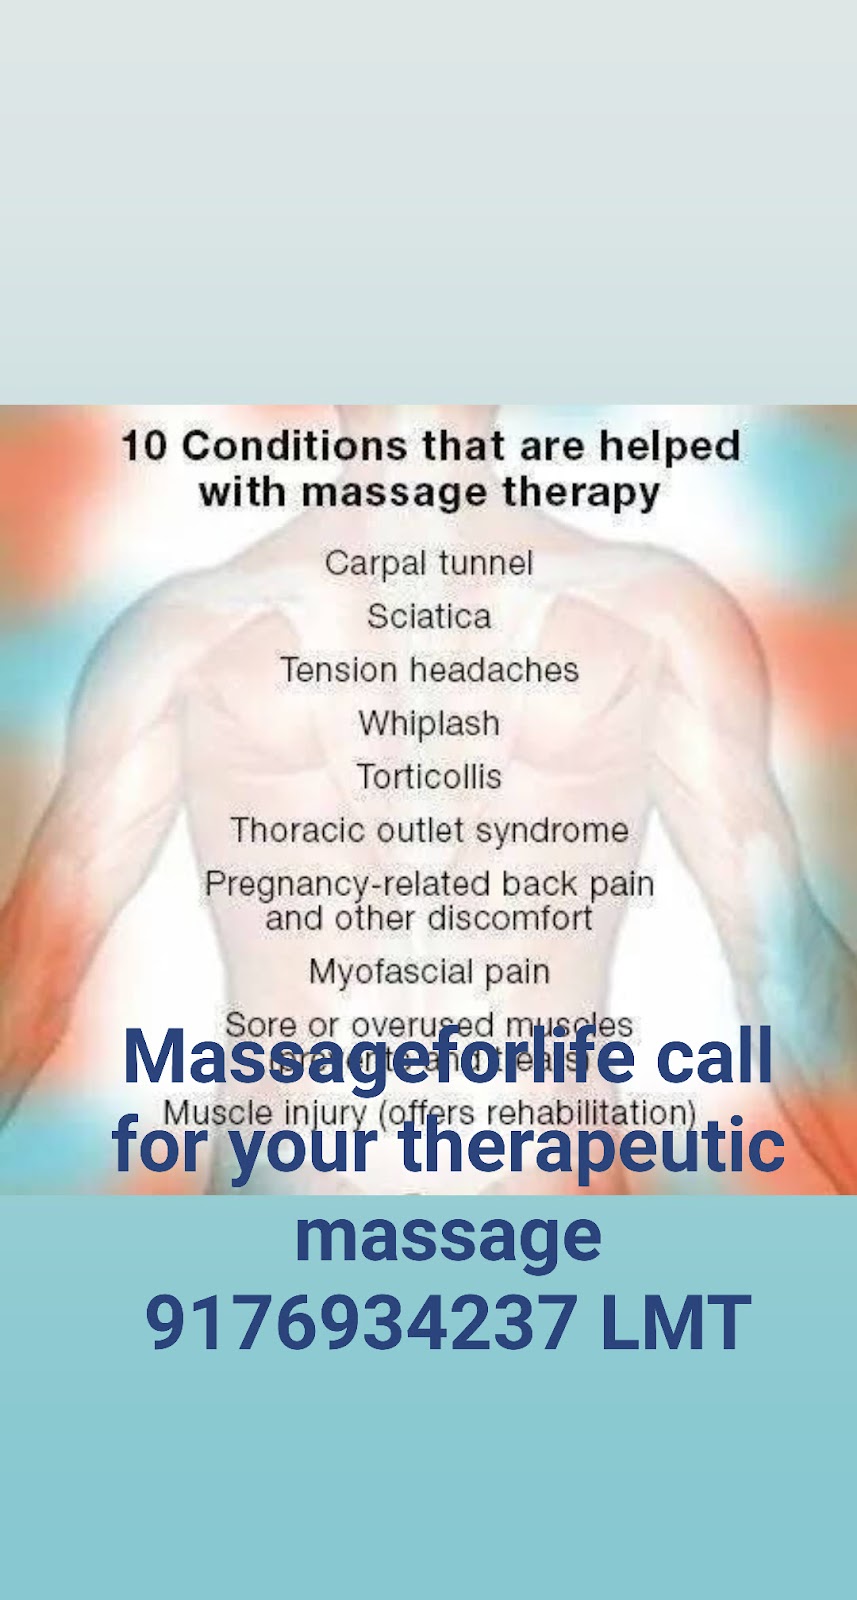 MK Massage therapy PC | 3815 Seagate Ave, Brooklyn, NY 11224 | Phone: (917) 693-4237